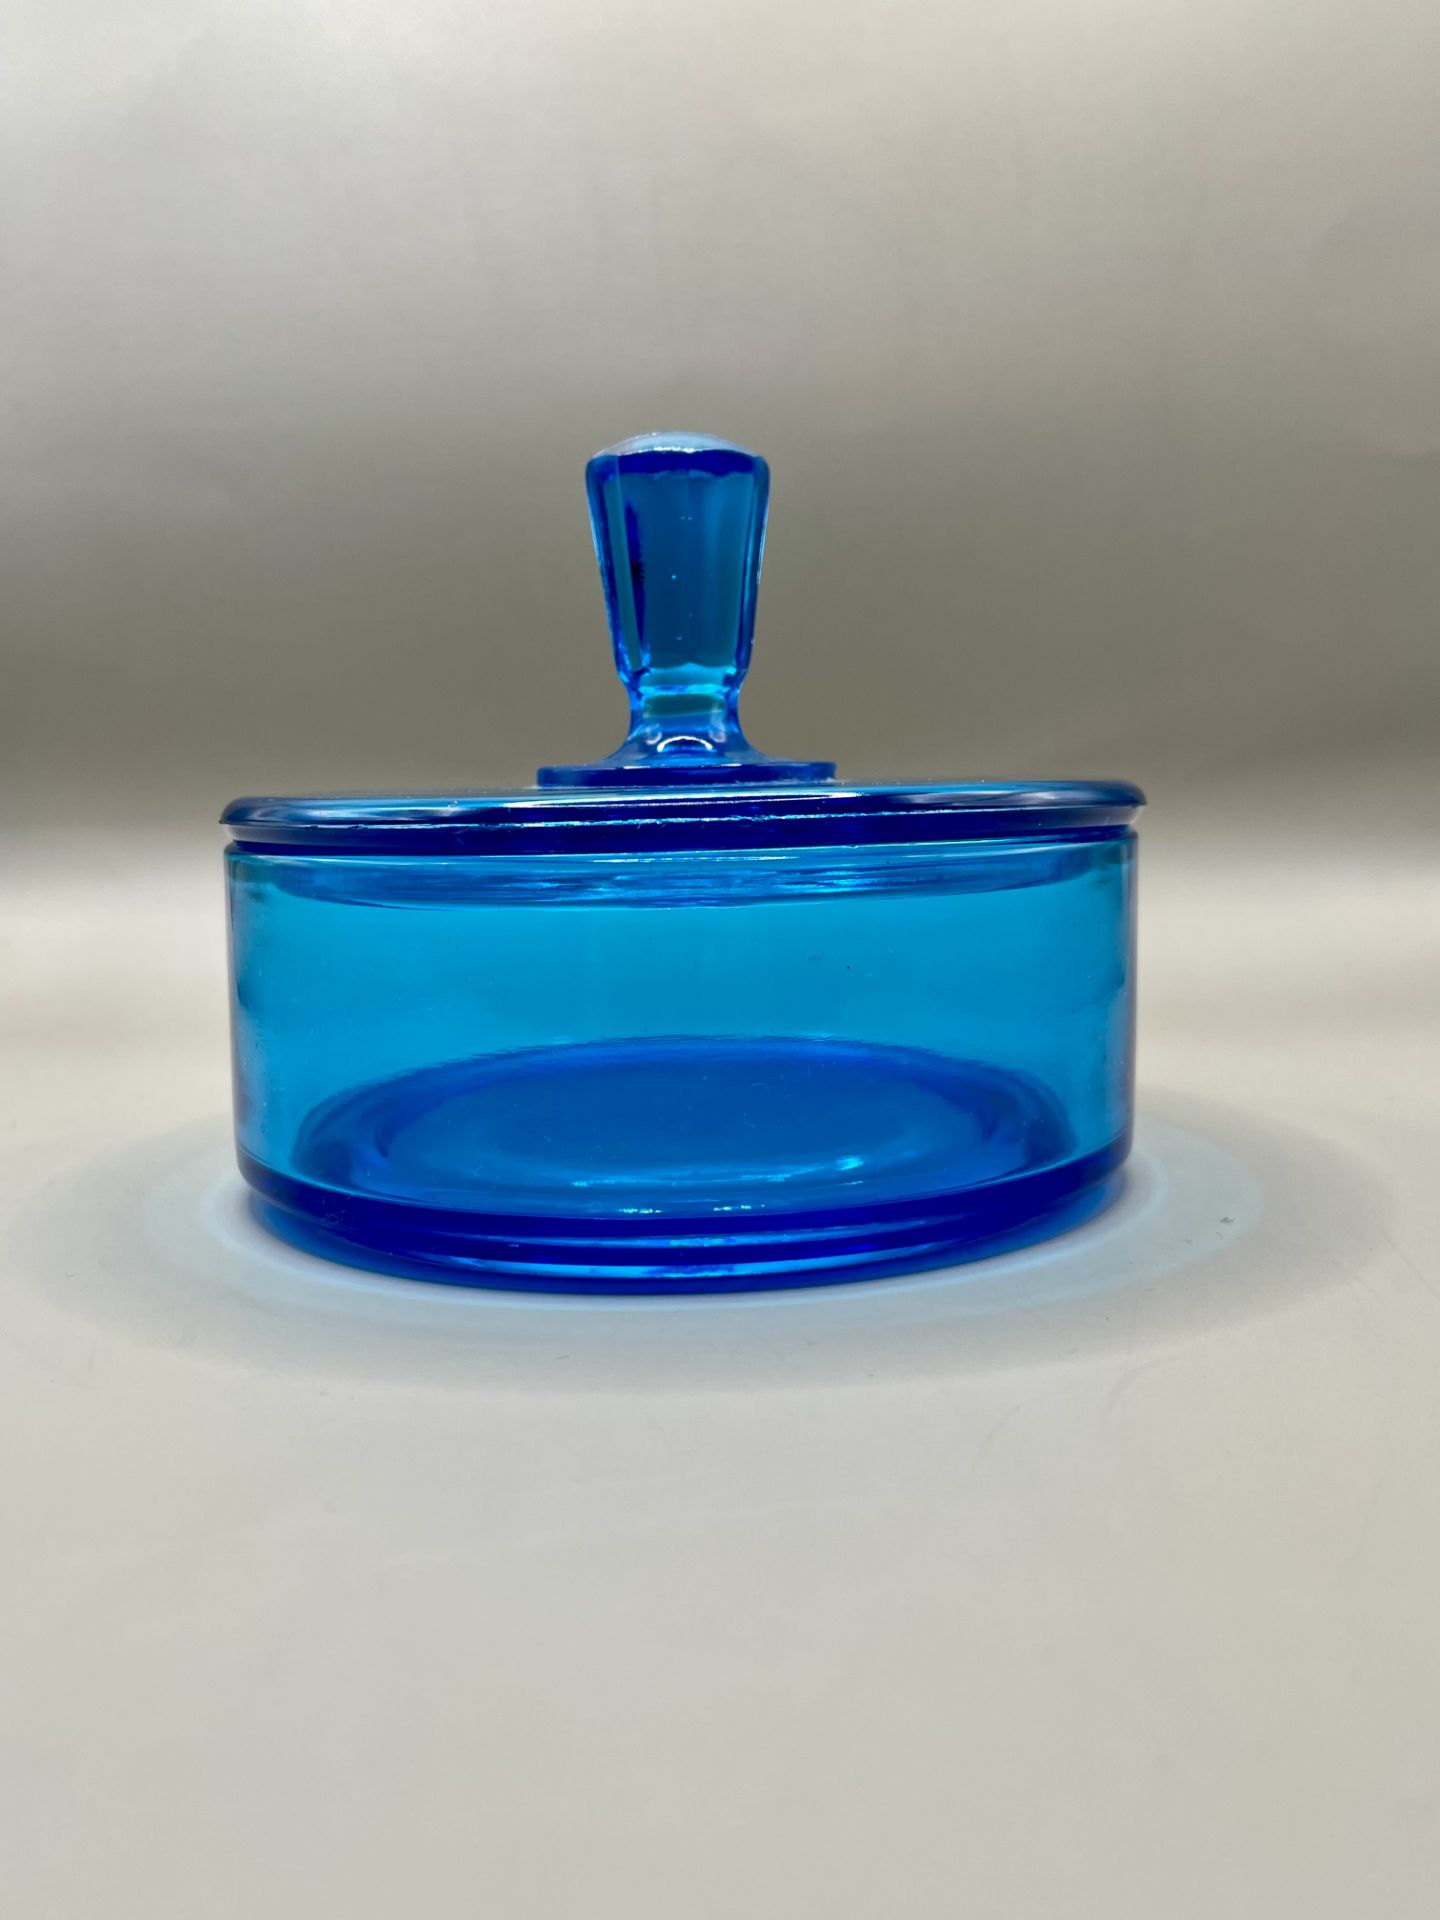 Vintage Martinsville Peacock Blue Glass Powder Box - Image 4 of 5